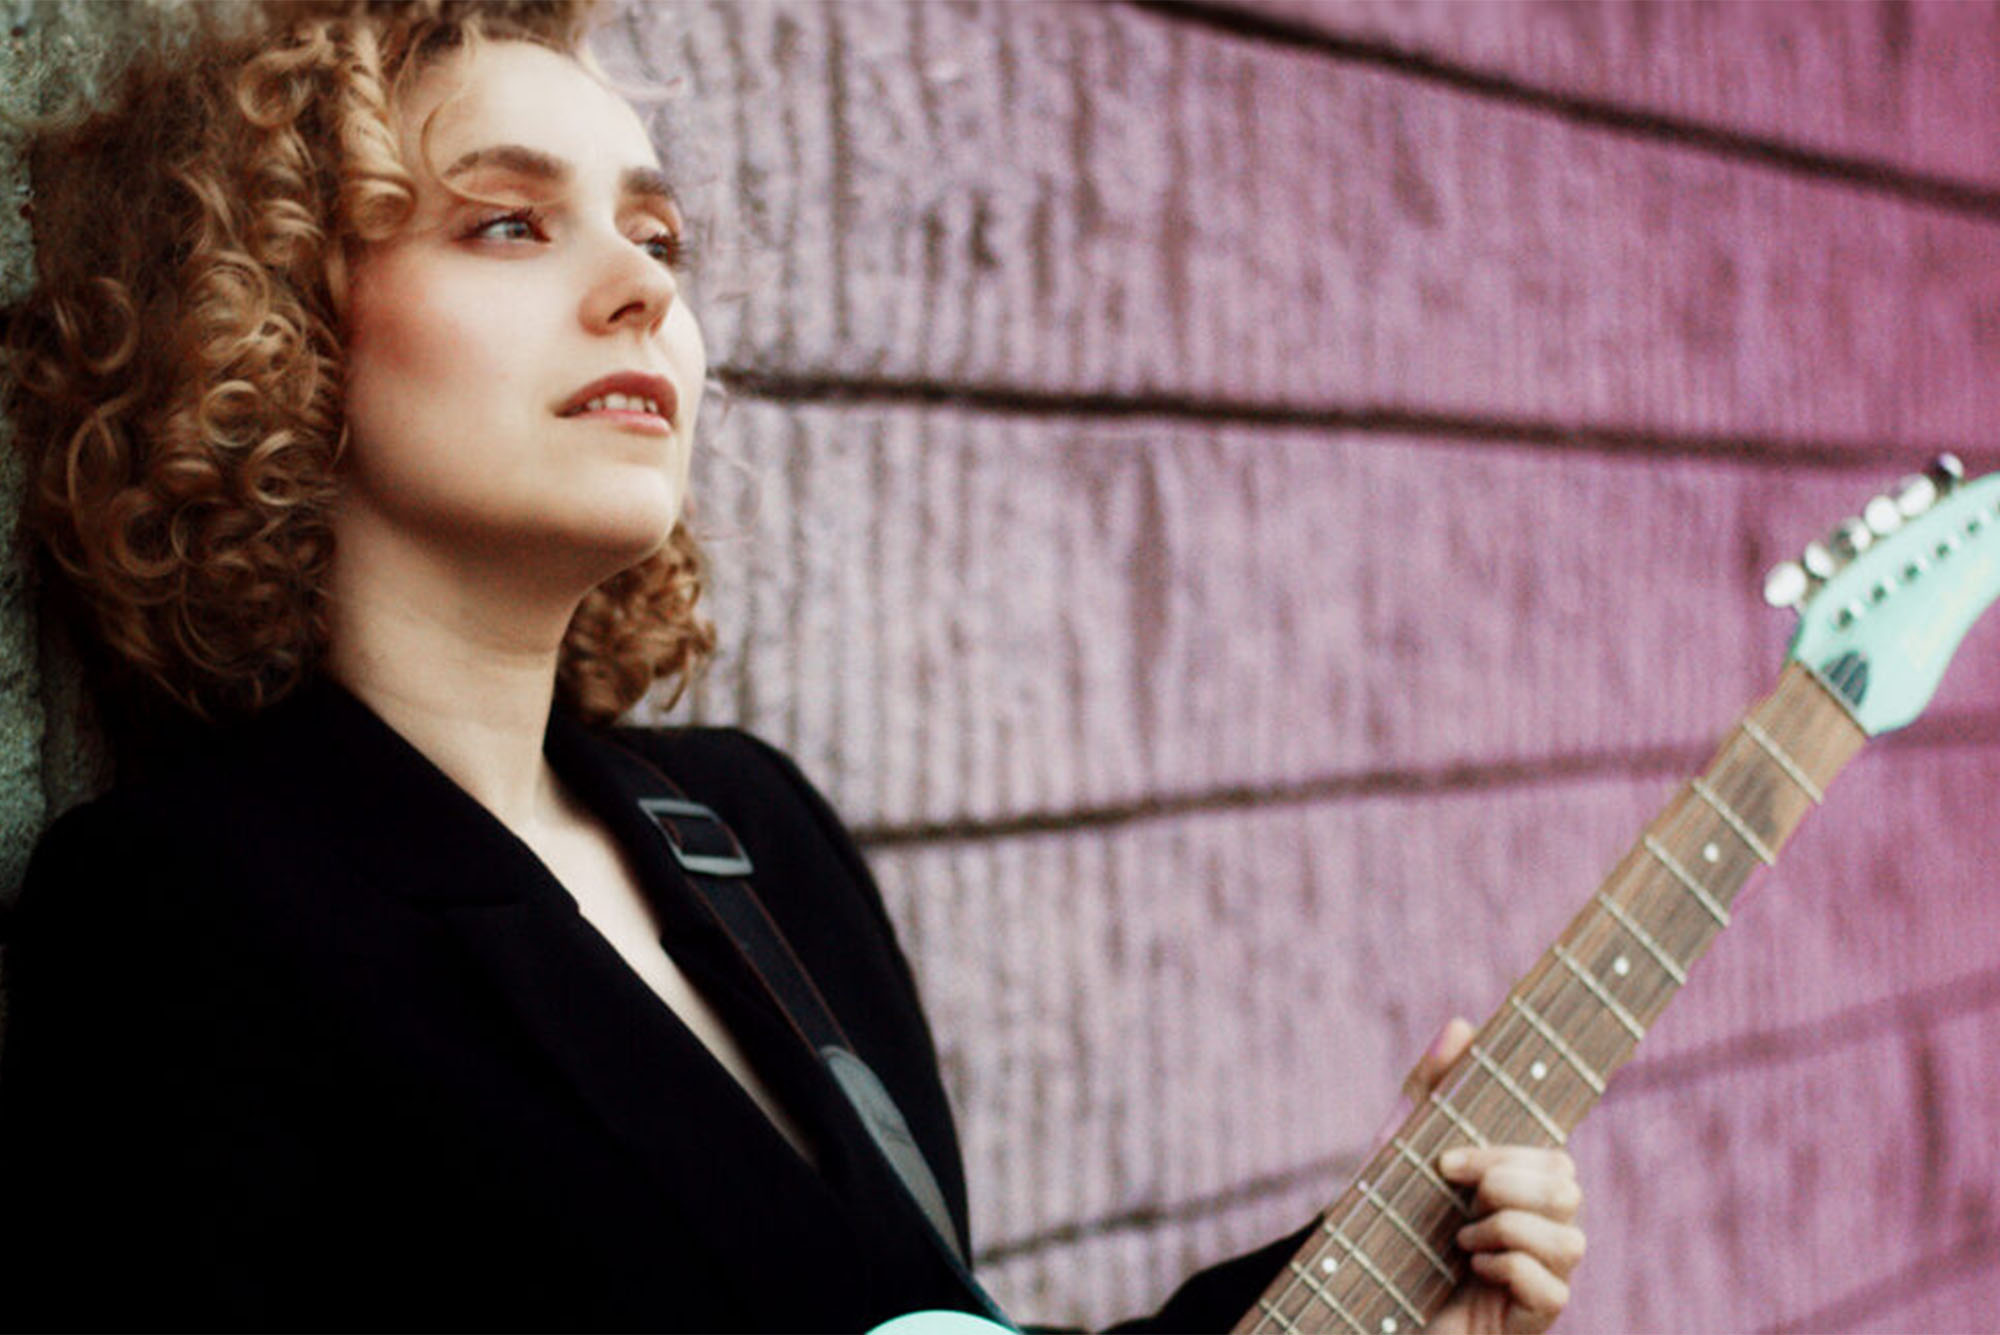 Photo: A person holding an electric guitar with curly hair in front of a brick wall